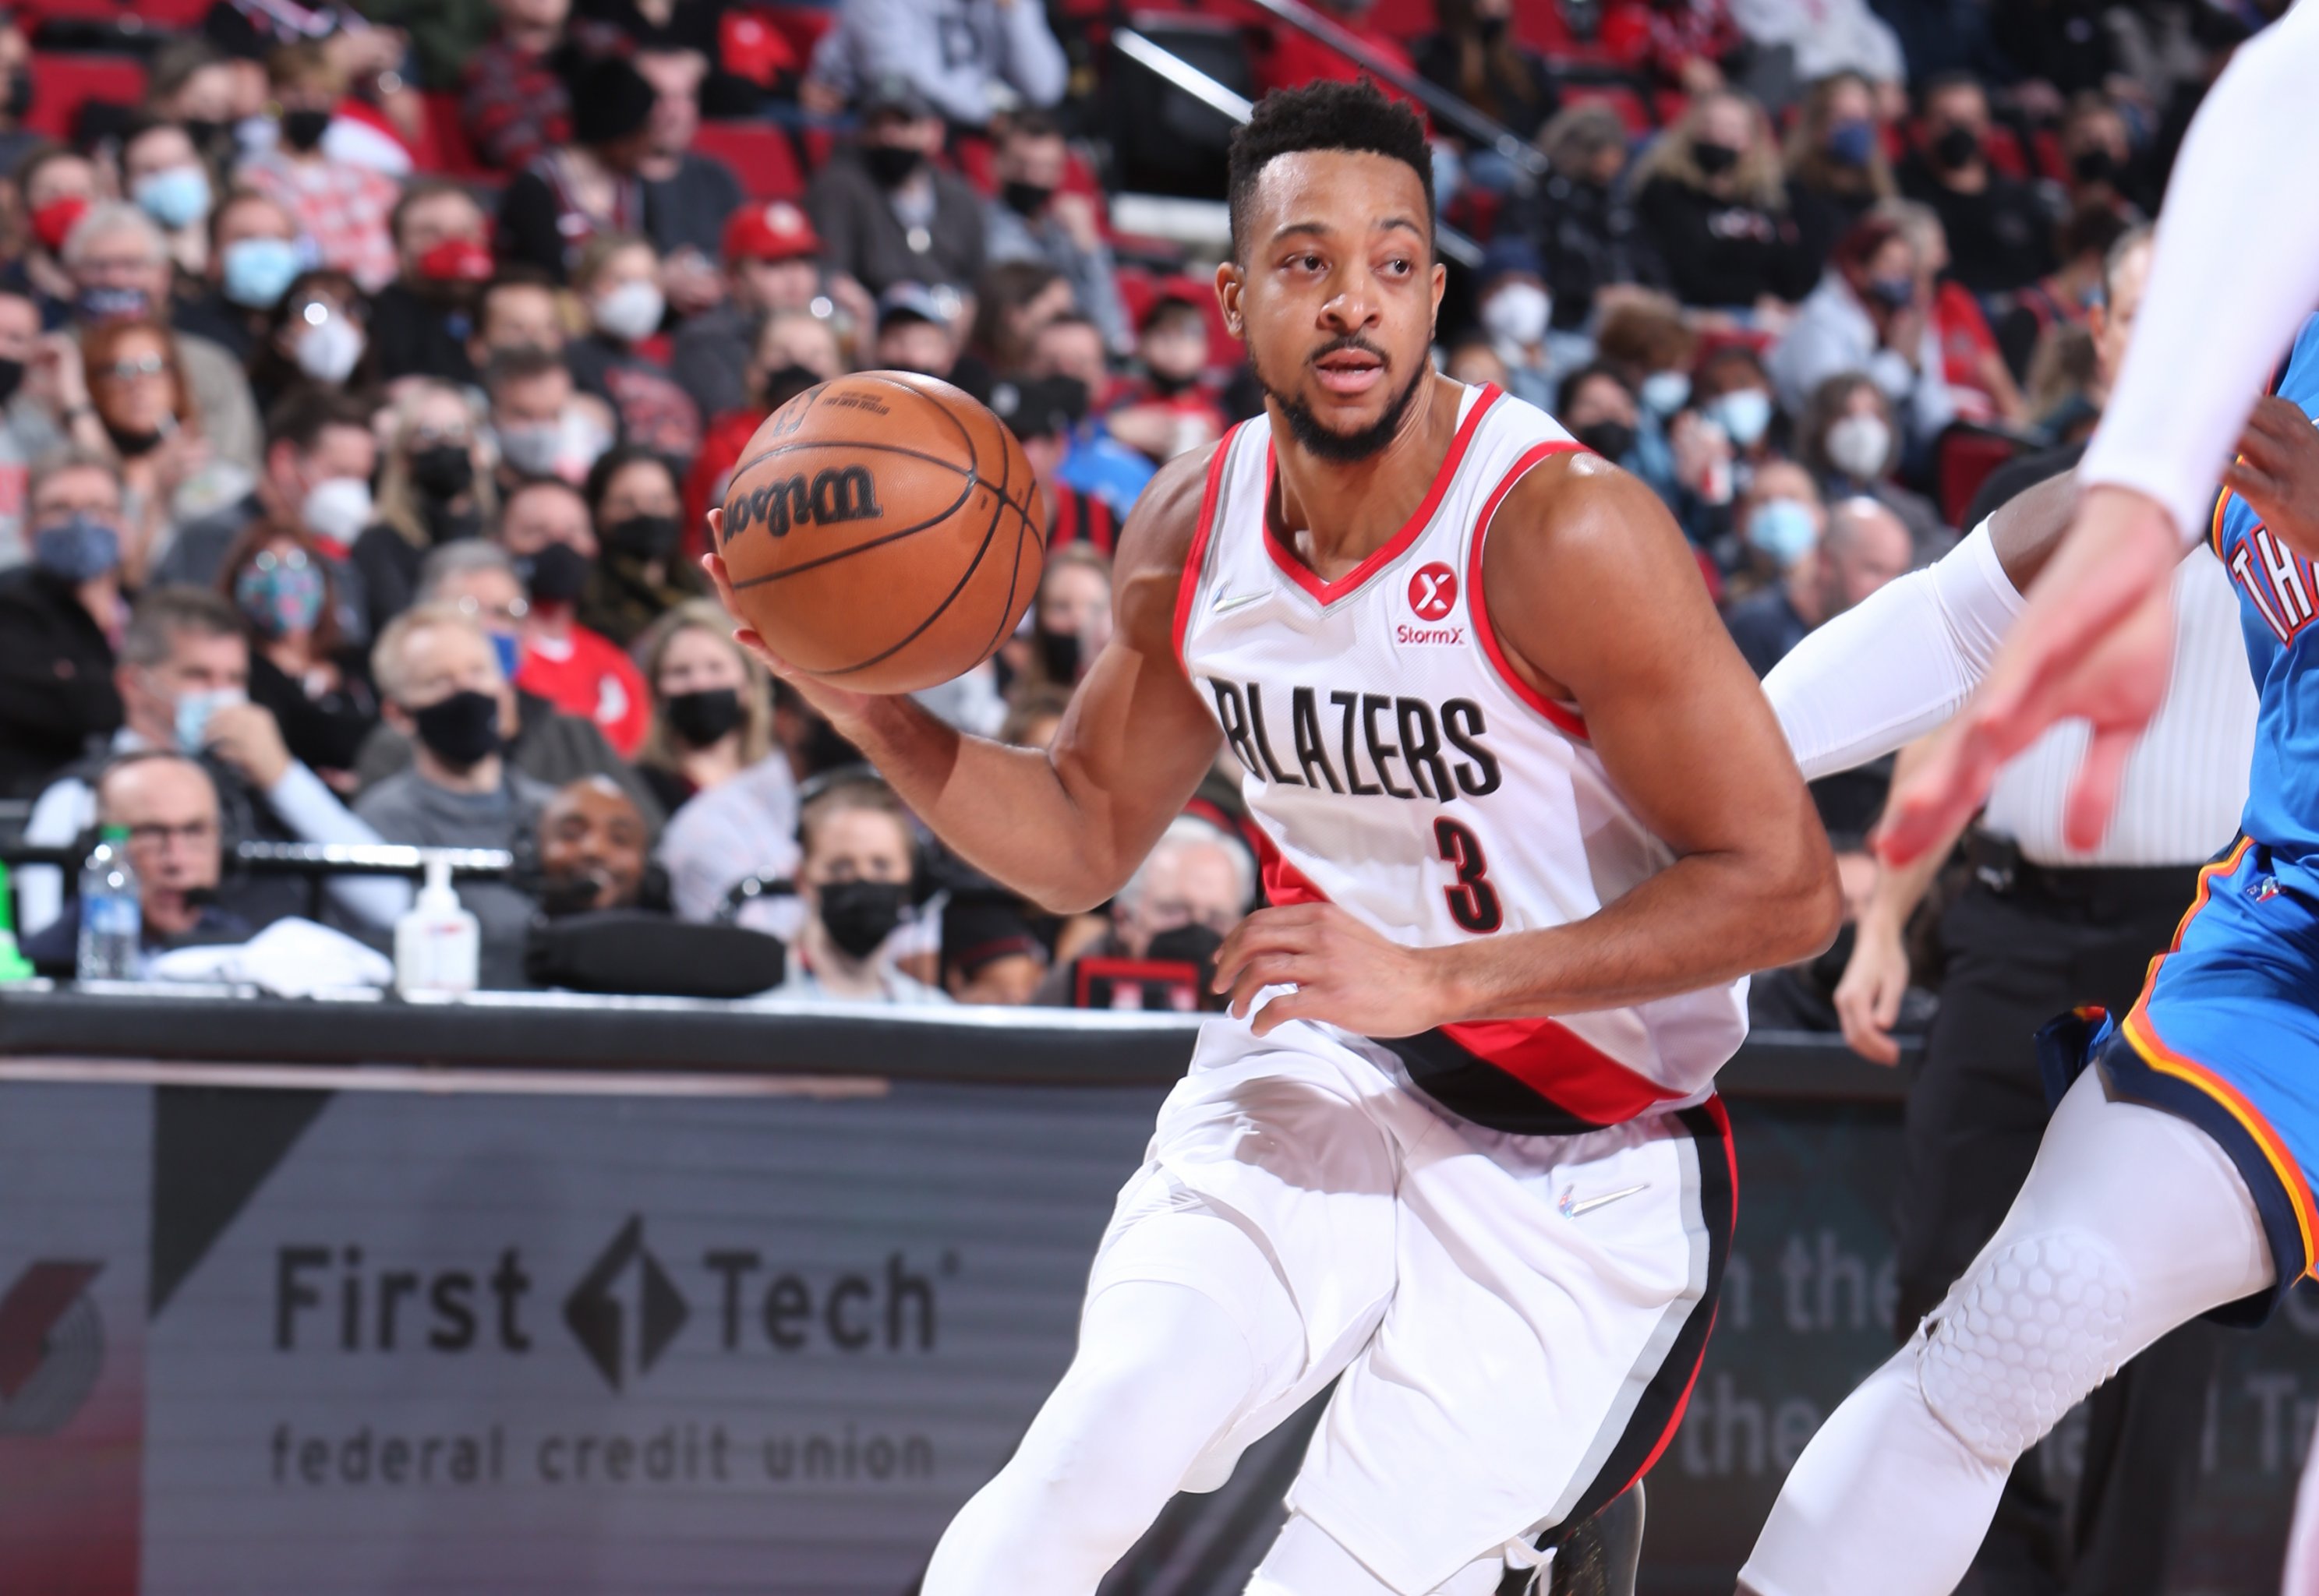 Blazers win again on the road, 106-95 over Pelicans - The Columbian